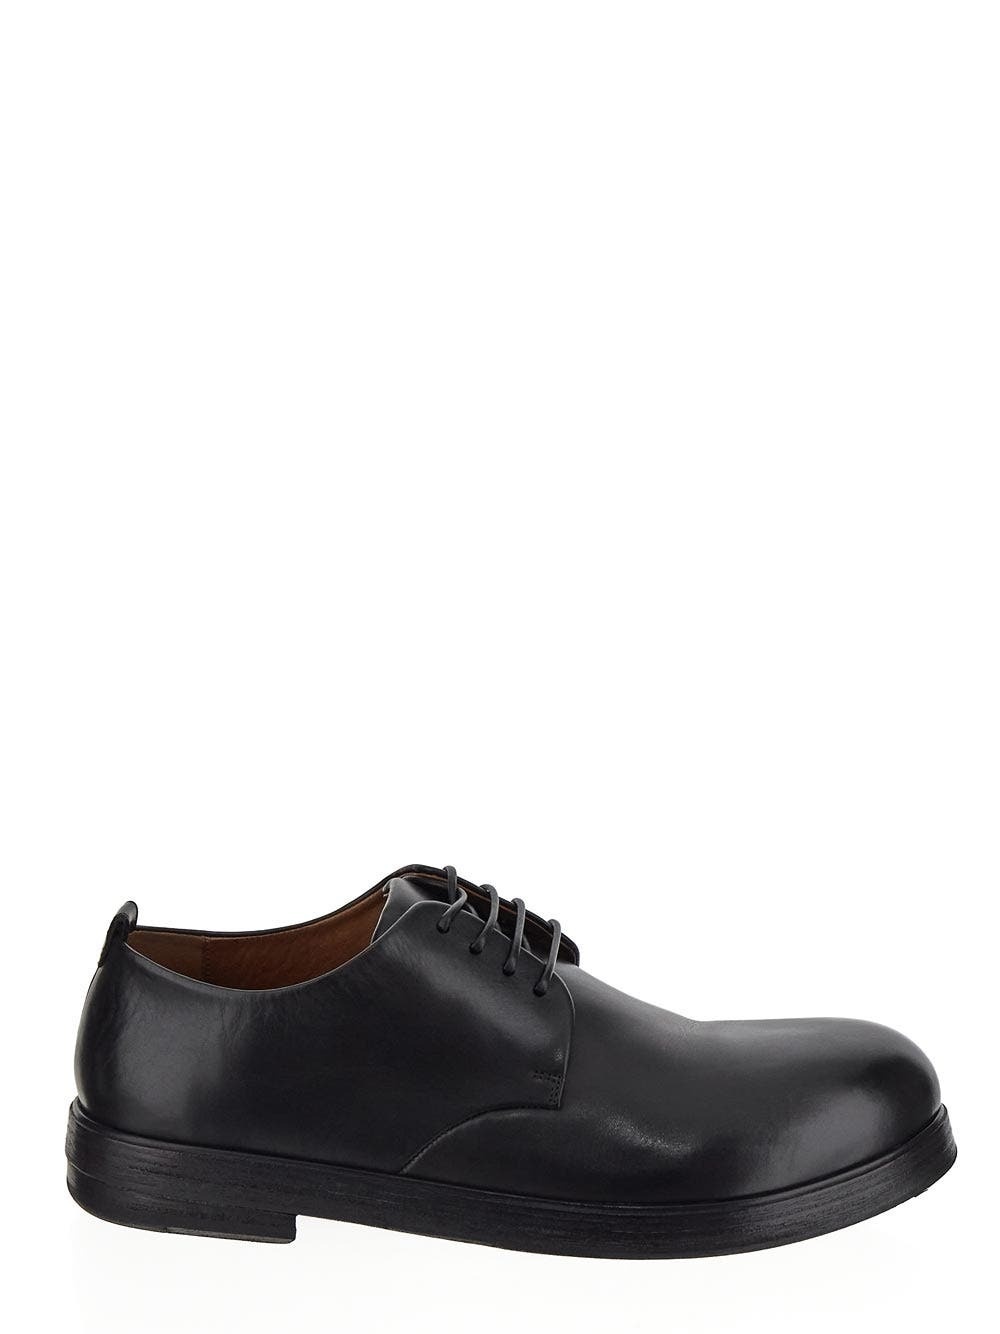 Photo: Marsell Zucca Zeppa Derby Shoes